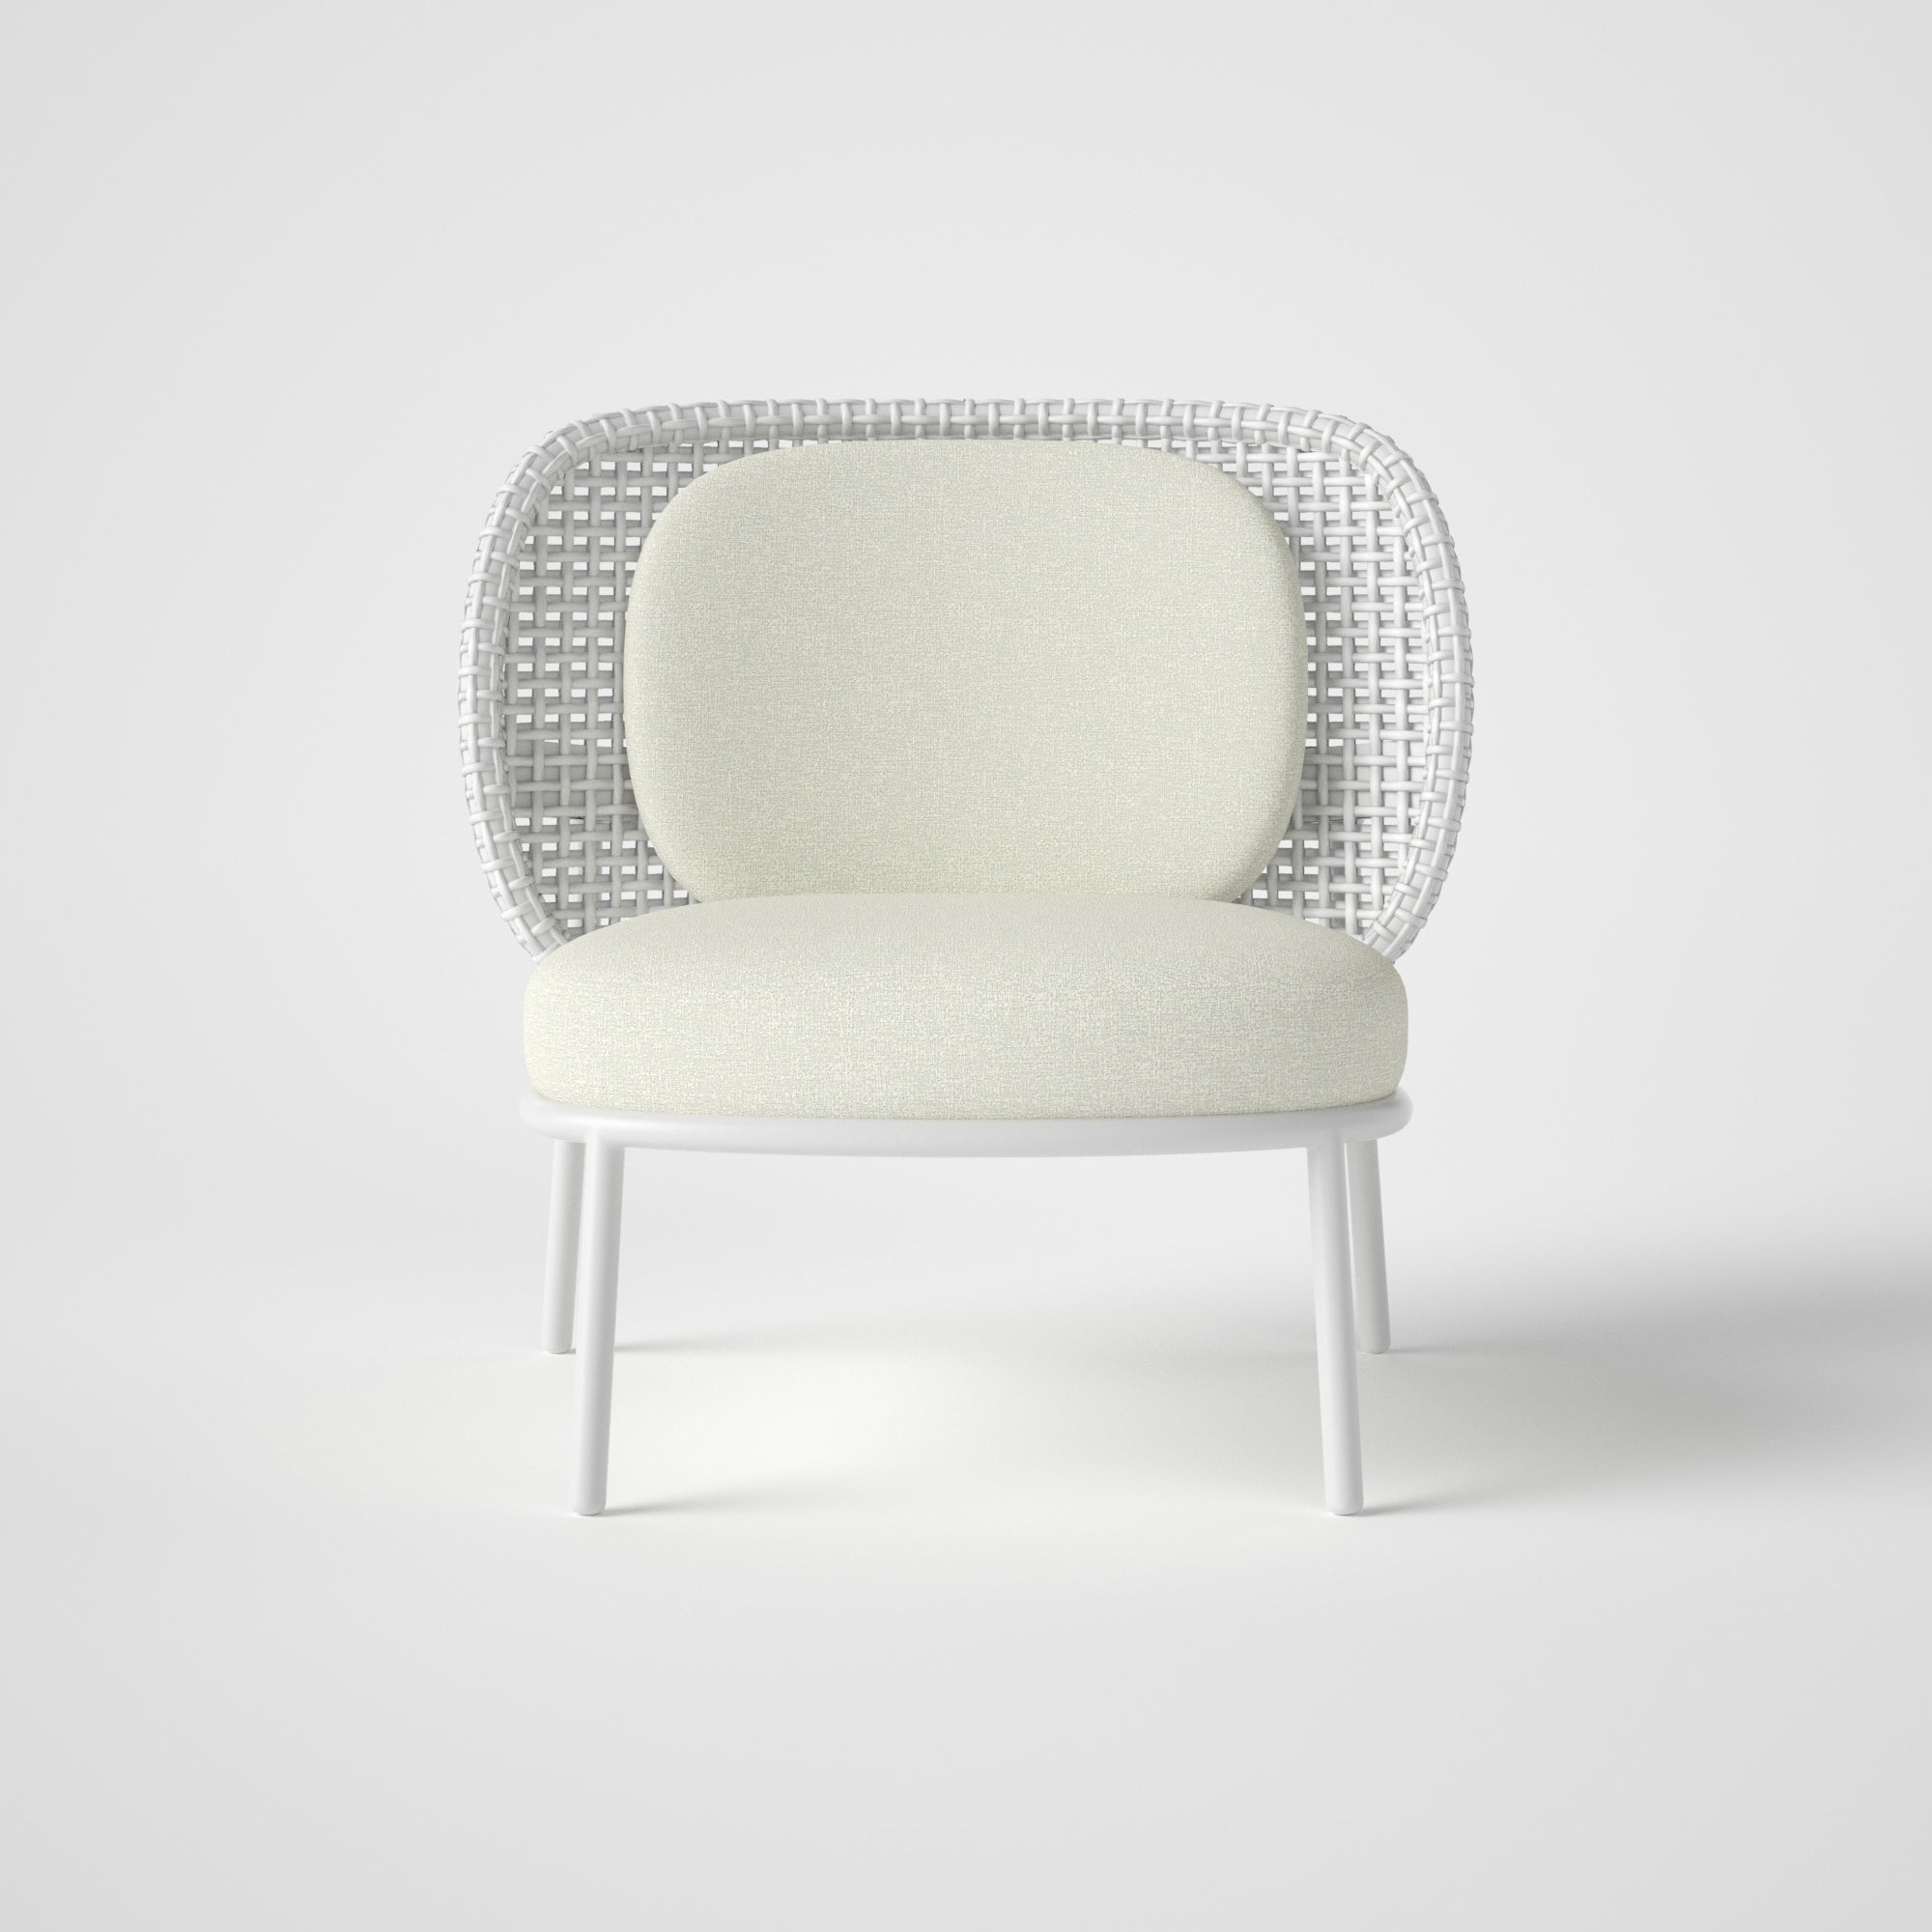 Provence Lounge Chair